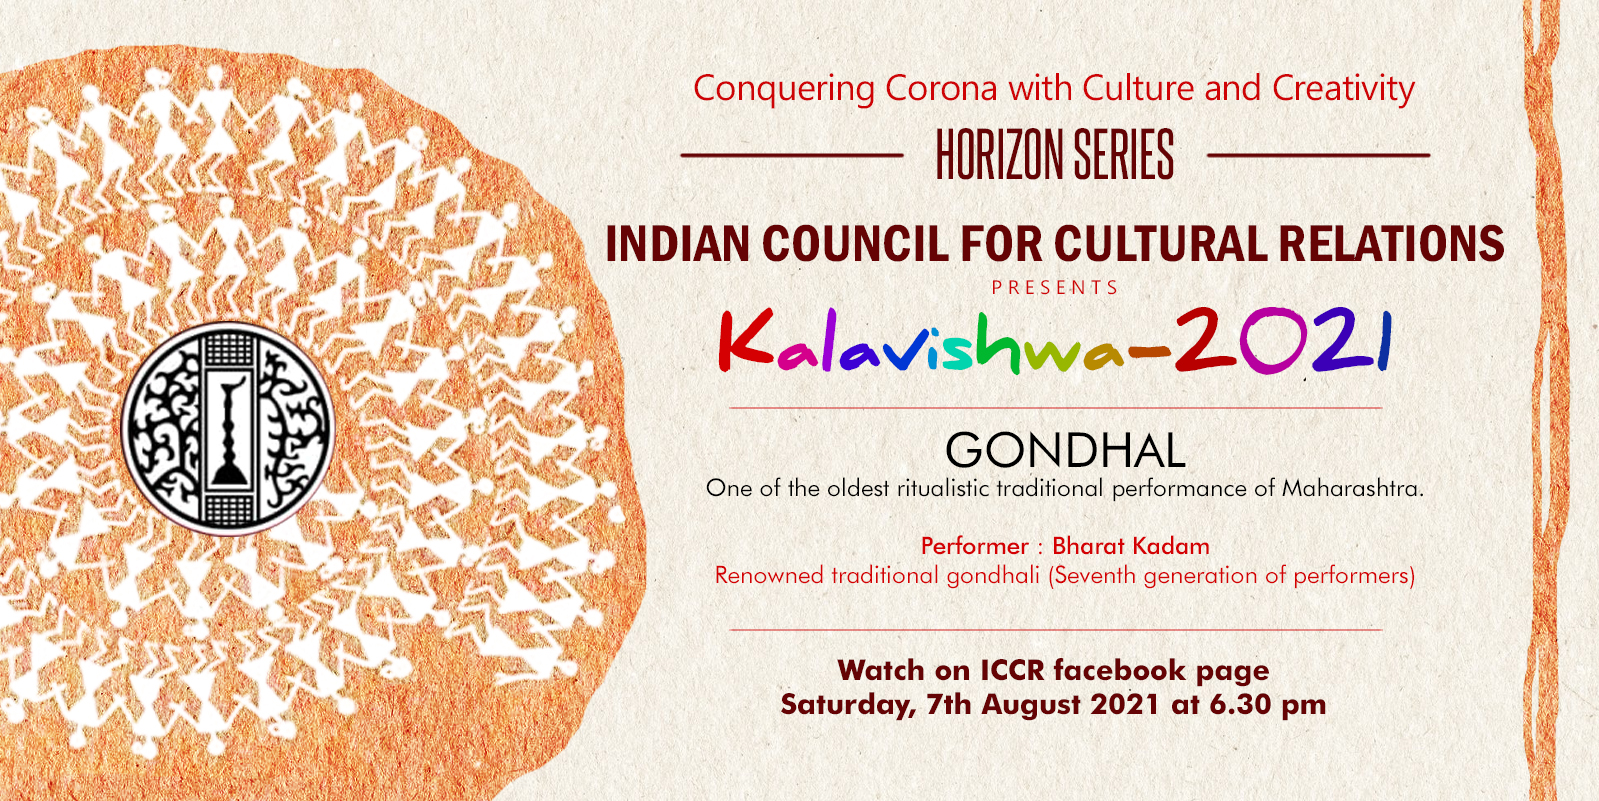 ICCR is presenting the 3rd episode of Kala Vishwa Campaign 2021' Gondhal' by Shri Bharat Kadam, renowned traditional Gondhali (Seventh generation of performers) on Saturday 7th August 2021 at 7.00 p.m.